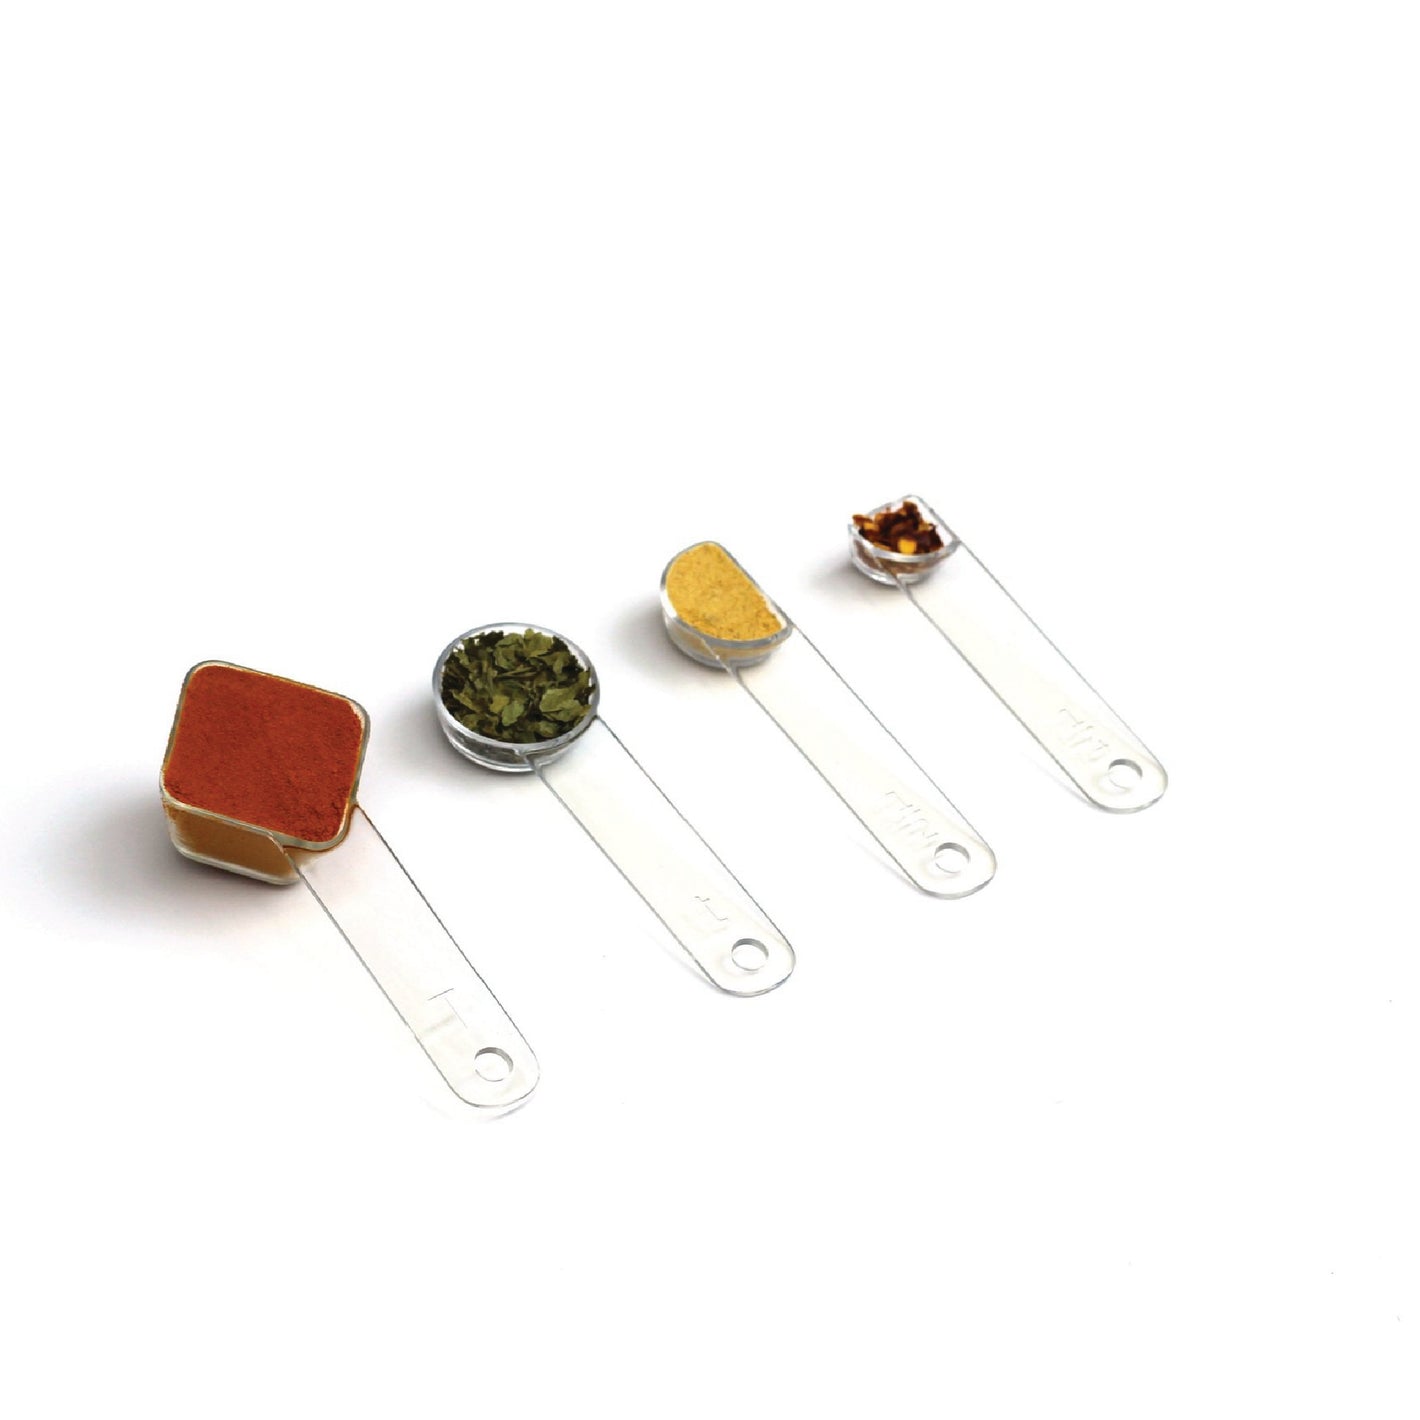 visual measuring spoons arranged in a row and filled with colorful spices 